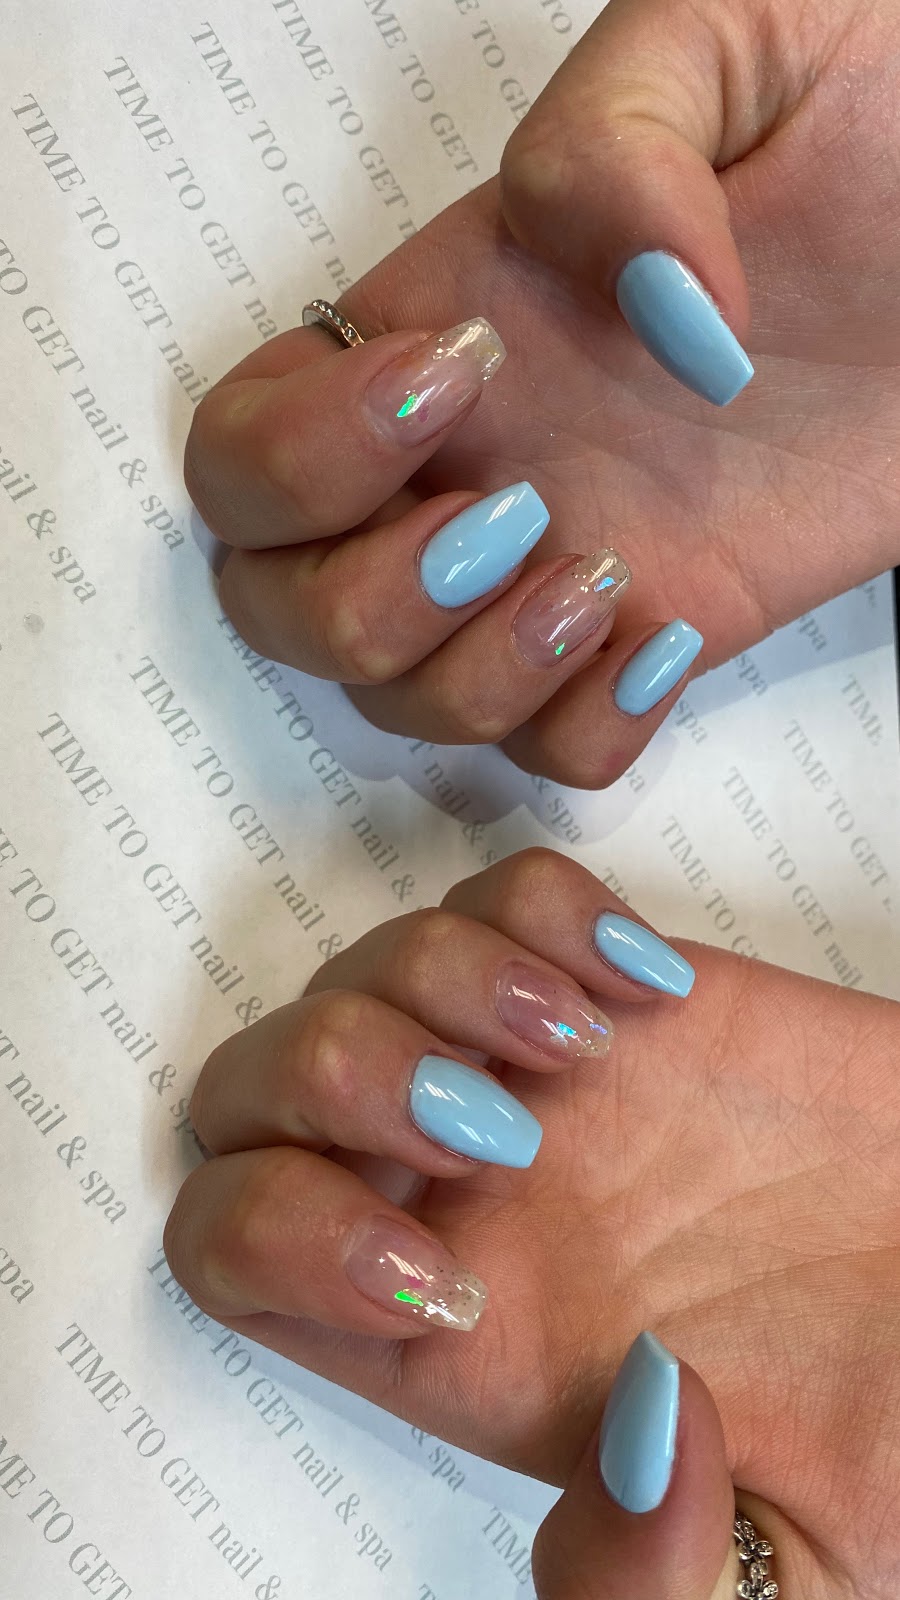 Time to Get nail & spa | 591 Montauk Hwy, Oakdale, NY 11769 | Phone: (631) 218-1878